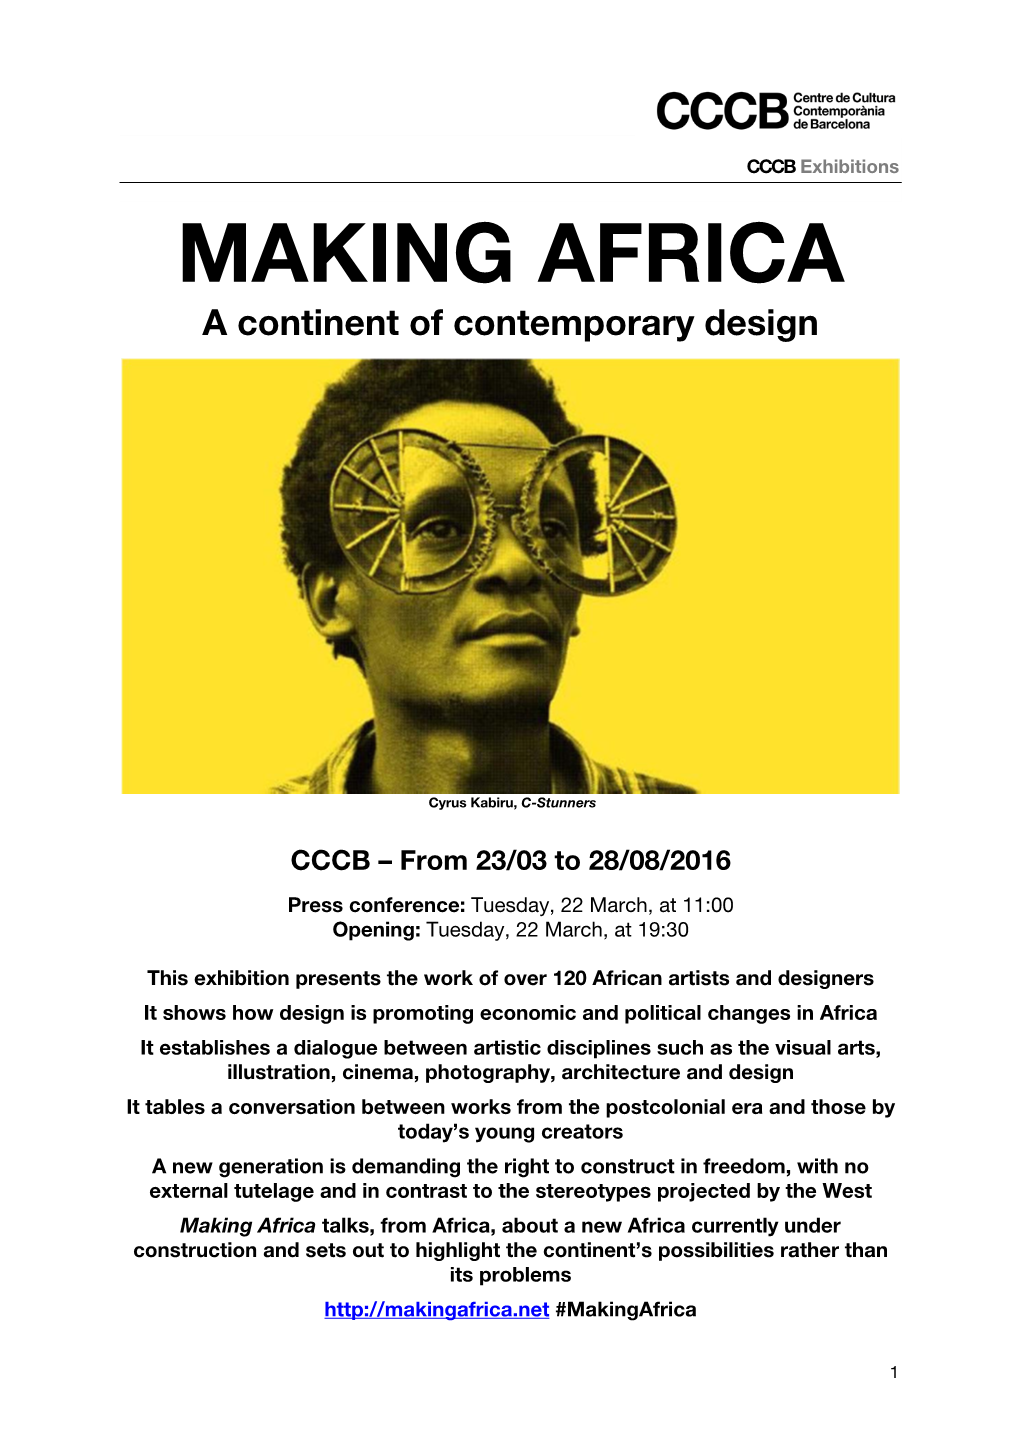 MAKING AFRICA a Continent of Contemporary Design